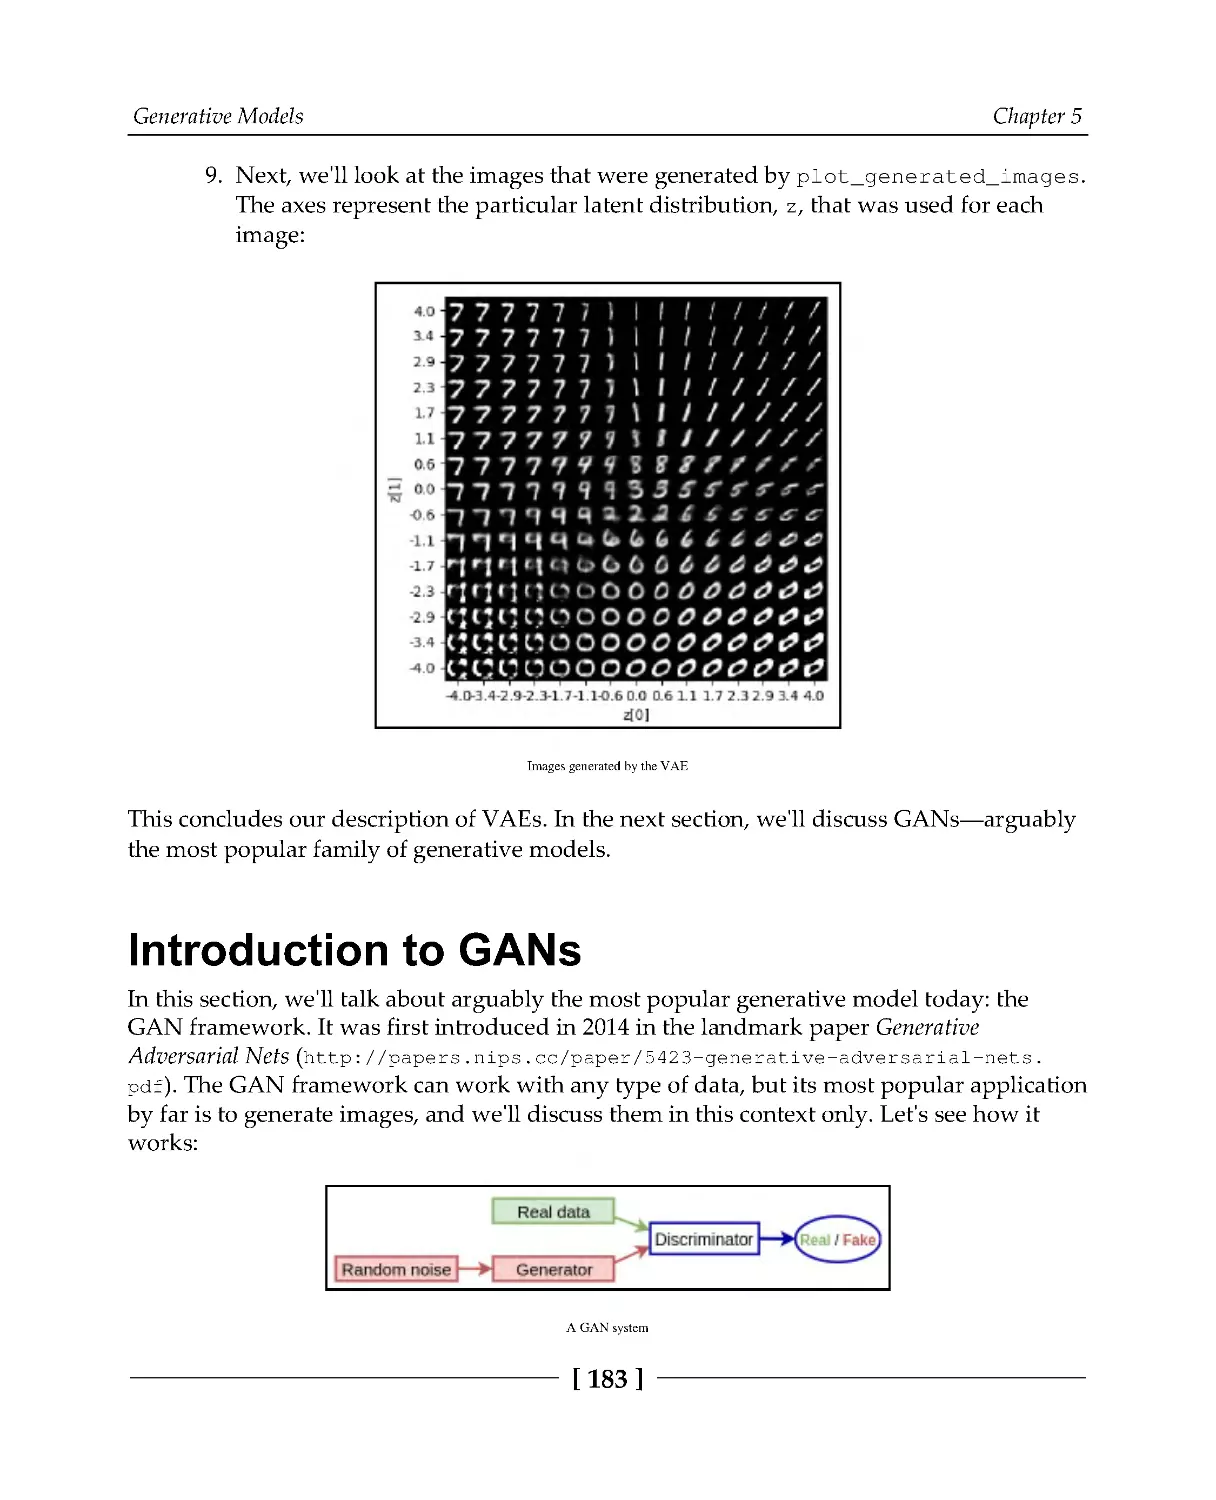 Introduction to GANs